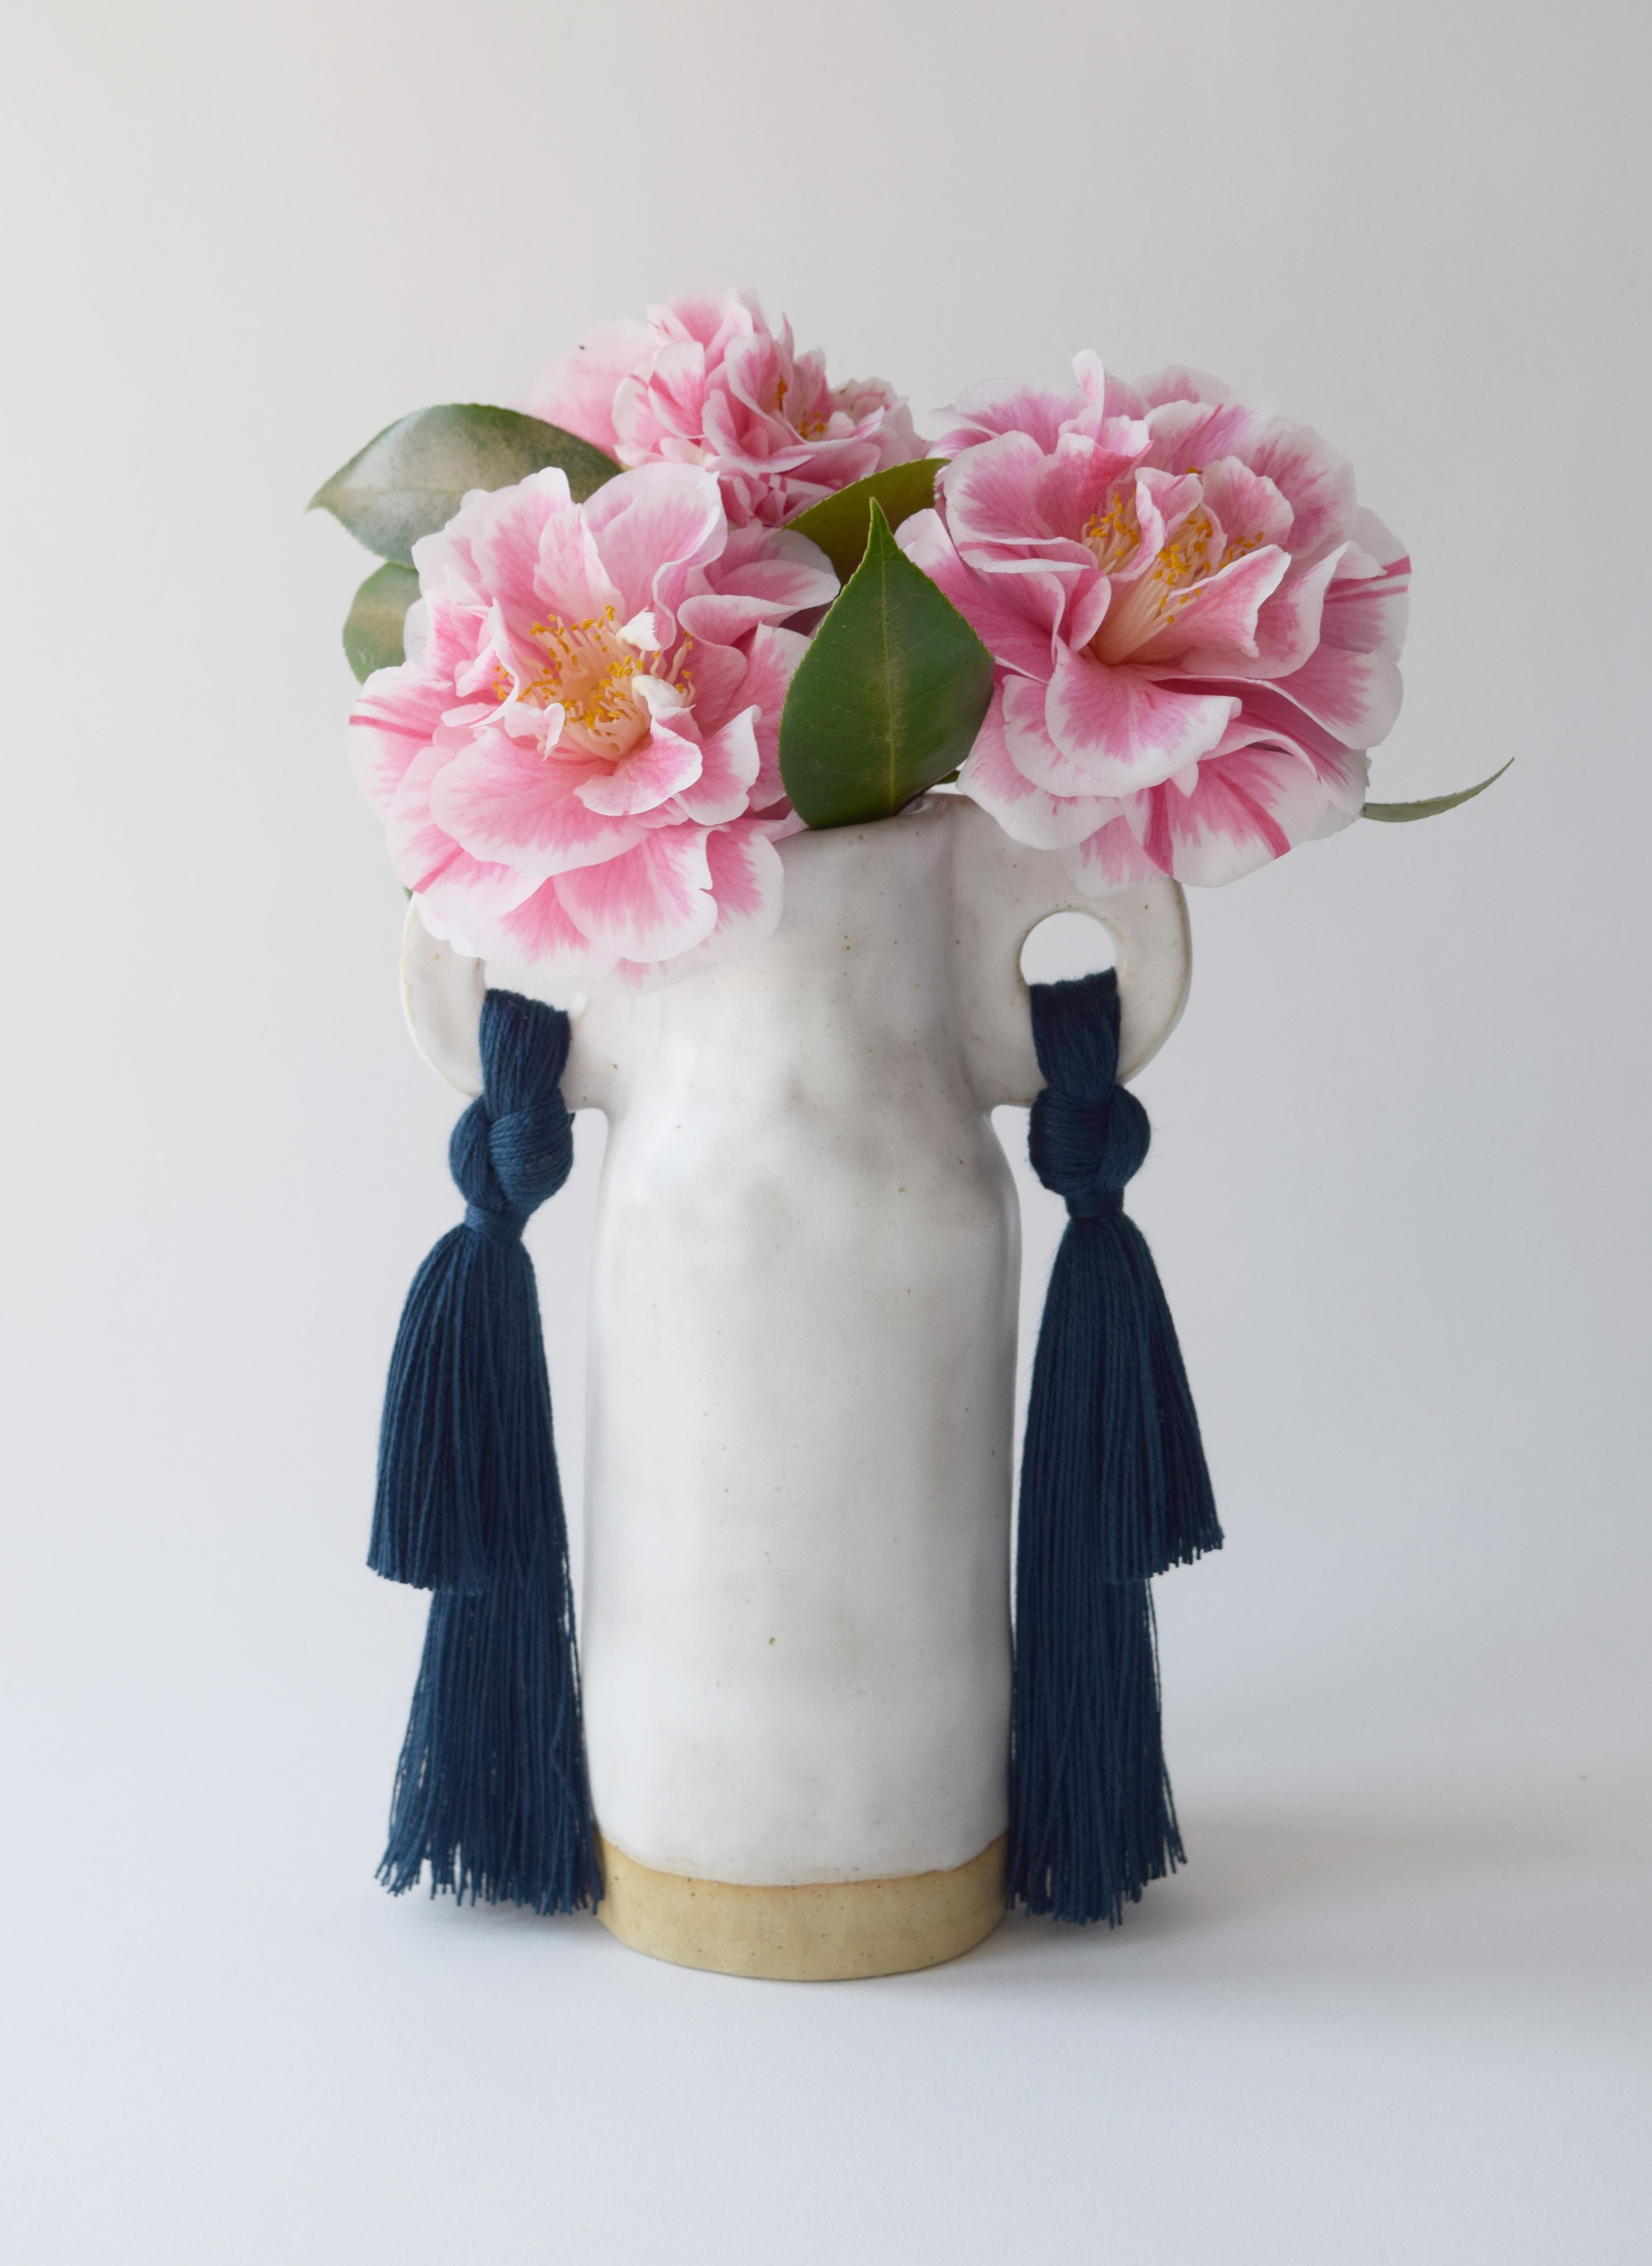 Vase #606 by Karen Gayle Tinney

A petite vase perfectly sized to stand alone in a small space or act as a companion to a larger piece. Each vase is formed by hand, making every piece unique.

Stoneware with satin white glaze. Navy tencel fringe